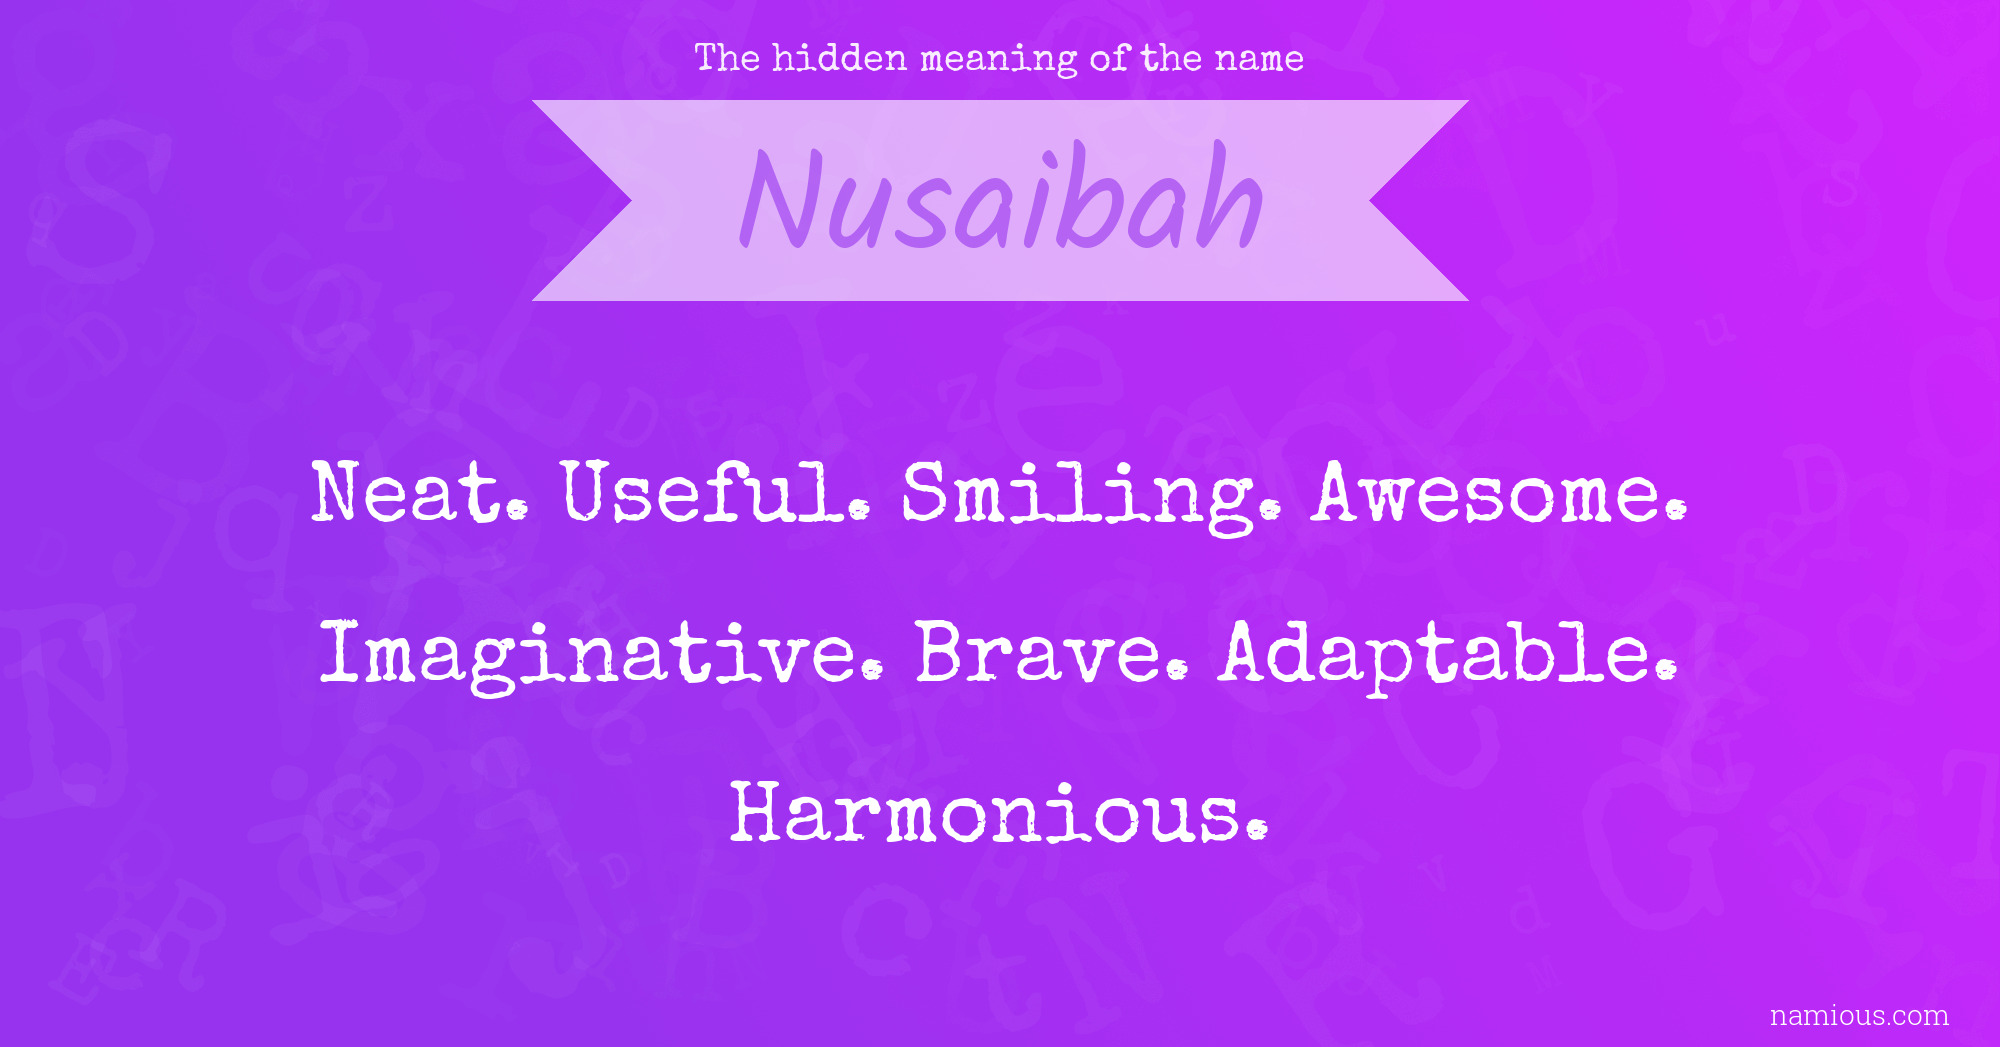 The hidden meaning of the name Nusaibah